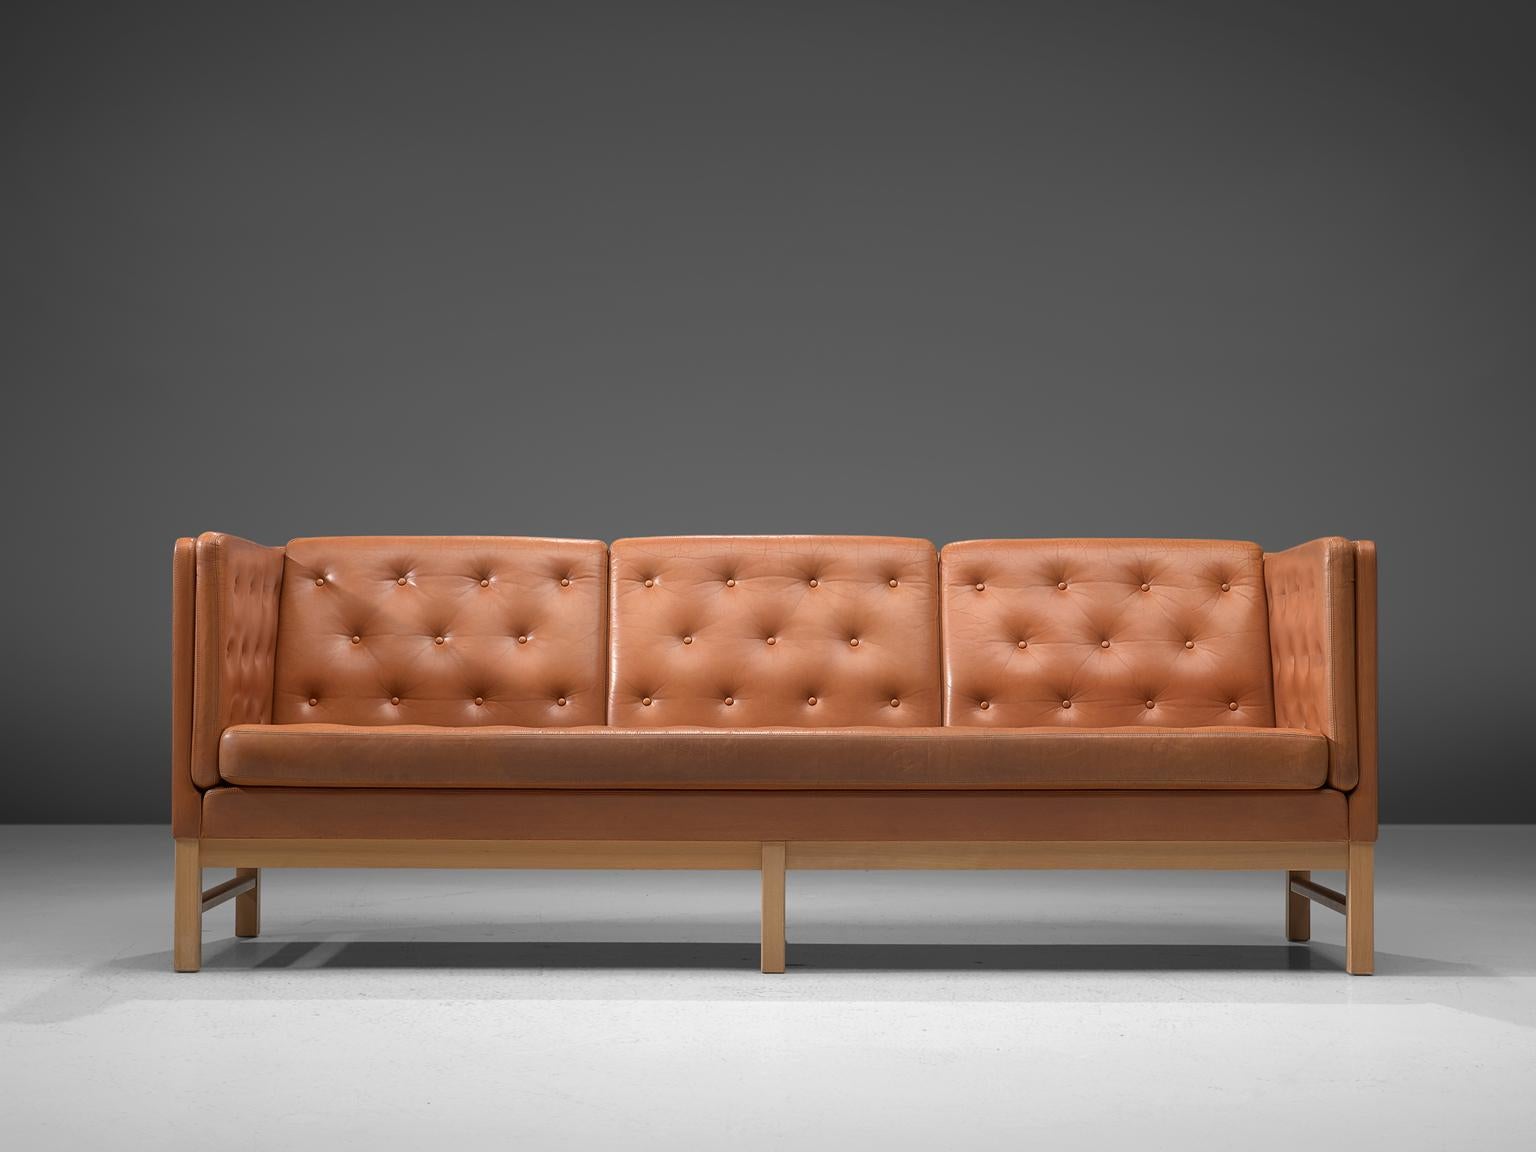 Erik Ole Jørgensen for Erik Jorgensen Møbelfabrik, sofa model EJ 315-3, wood and leather, Denmark, 1972. 

Elegant three-seat sofa by Erik Ole Jørgensen. This sofa has a luxurious appearance due to the tufted cognac leather. The orderly placed